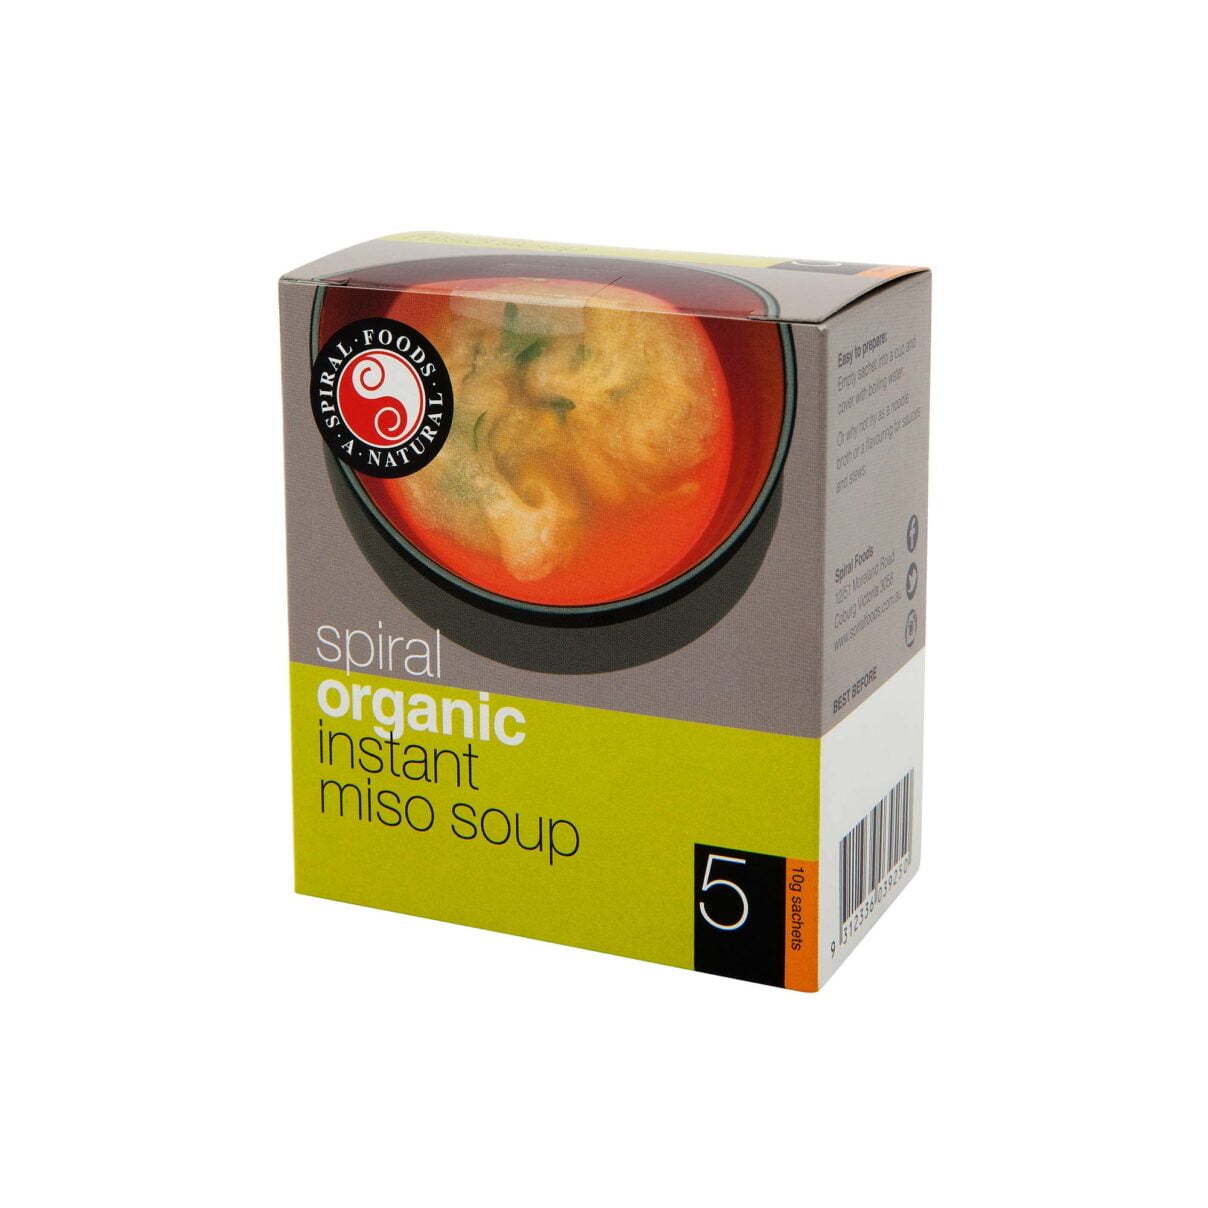 Spiral Organic Instant Miso Soup